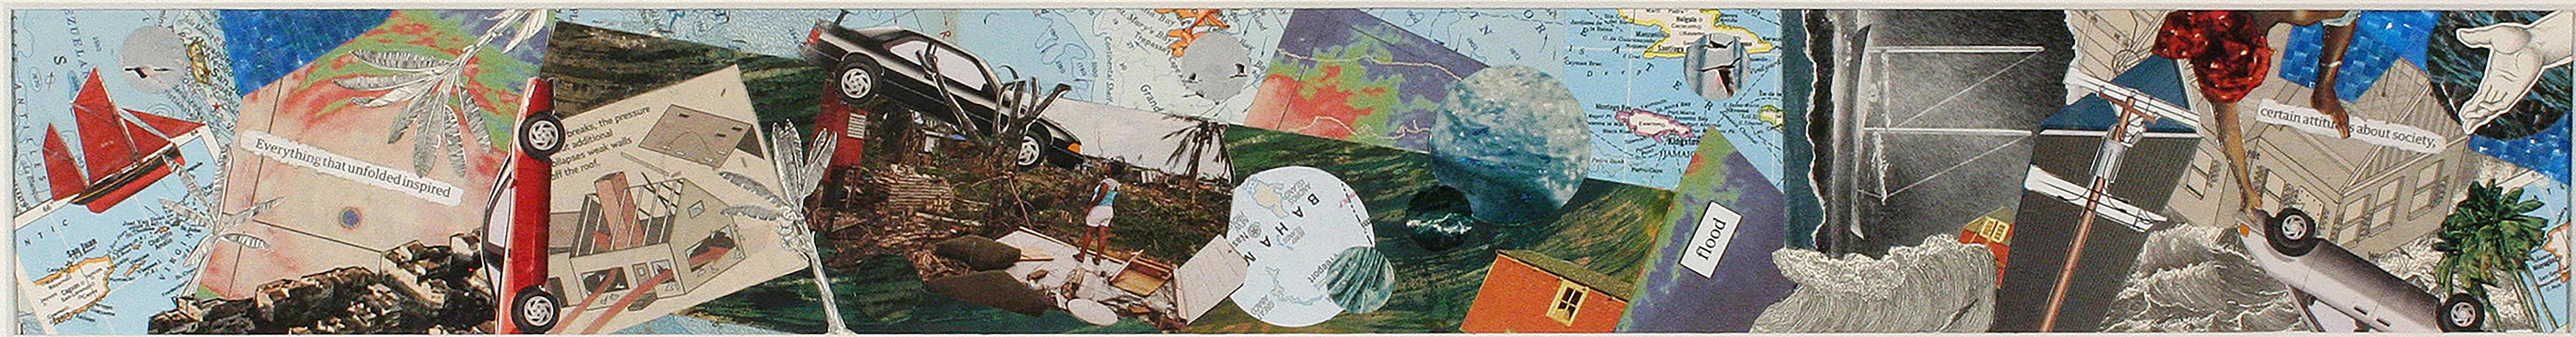 Collage of maps, boat, sea, car, trees, house damage, Bahamas map, power link text of flood